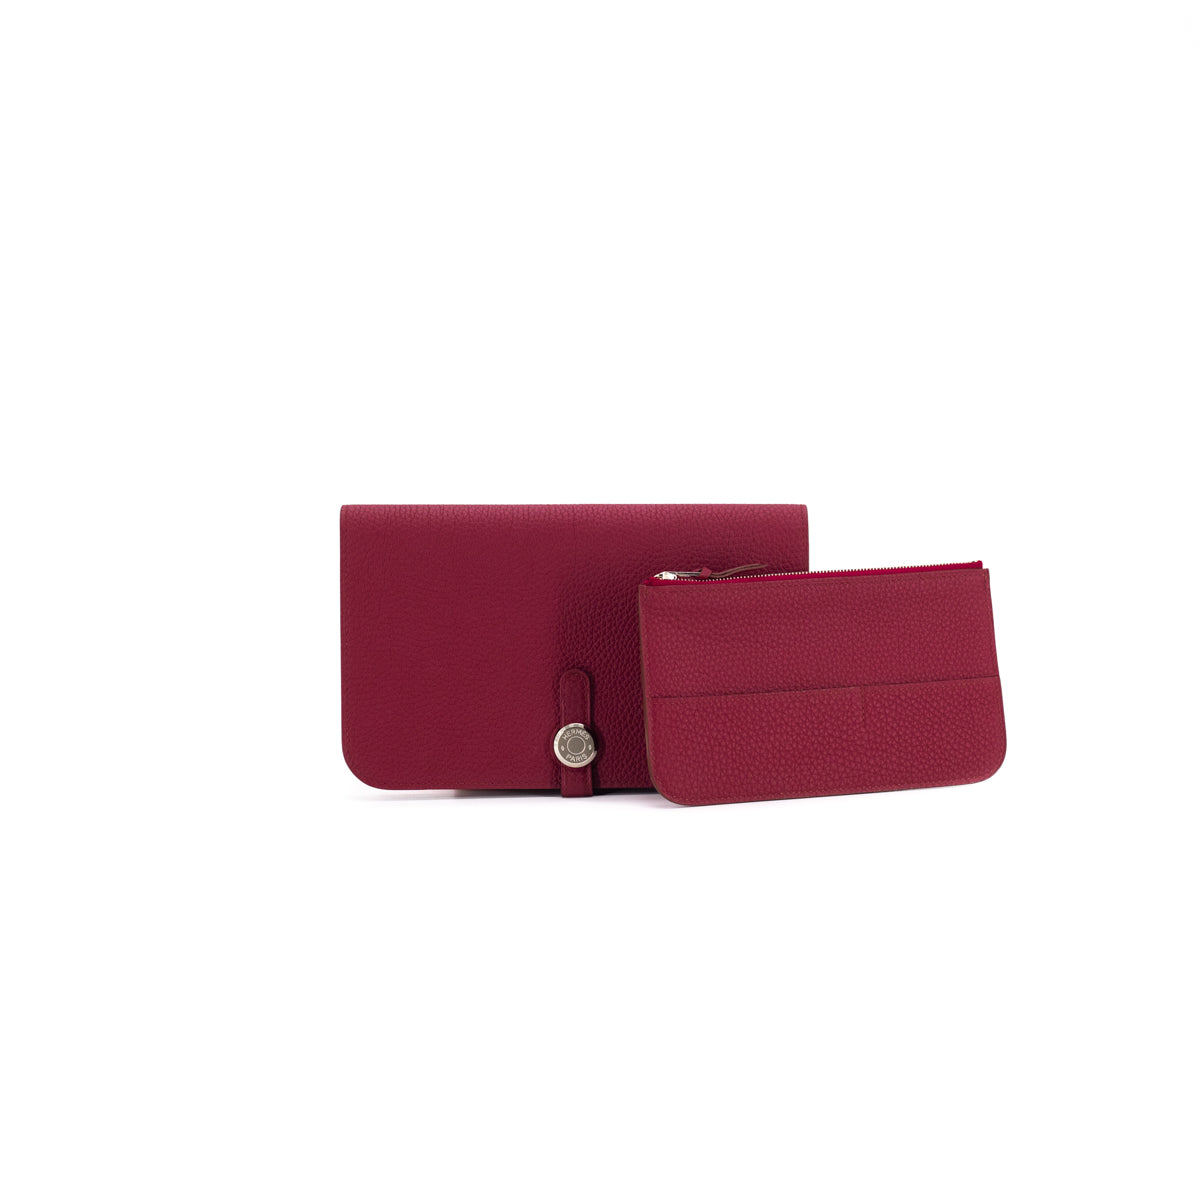 Sold at Auction: A HERMES DOGON DUO WALLET